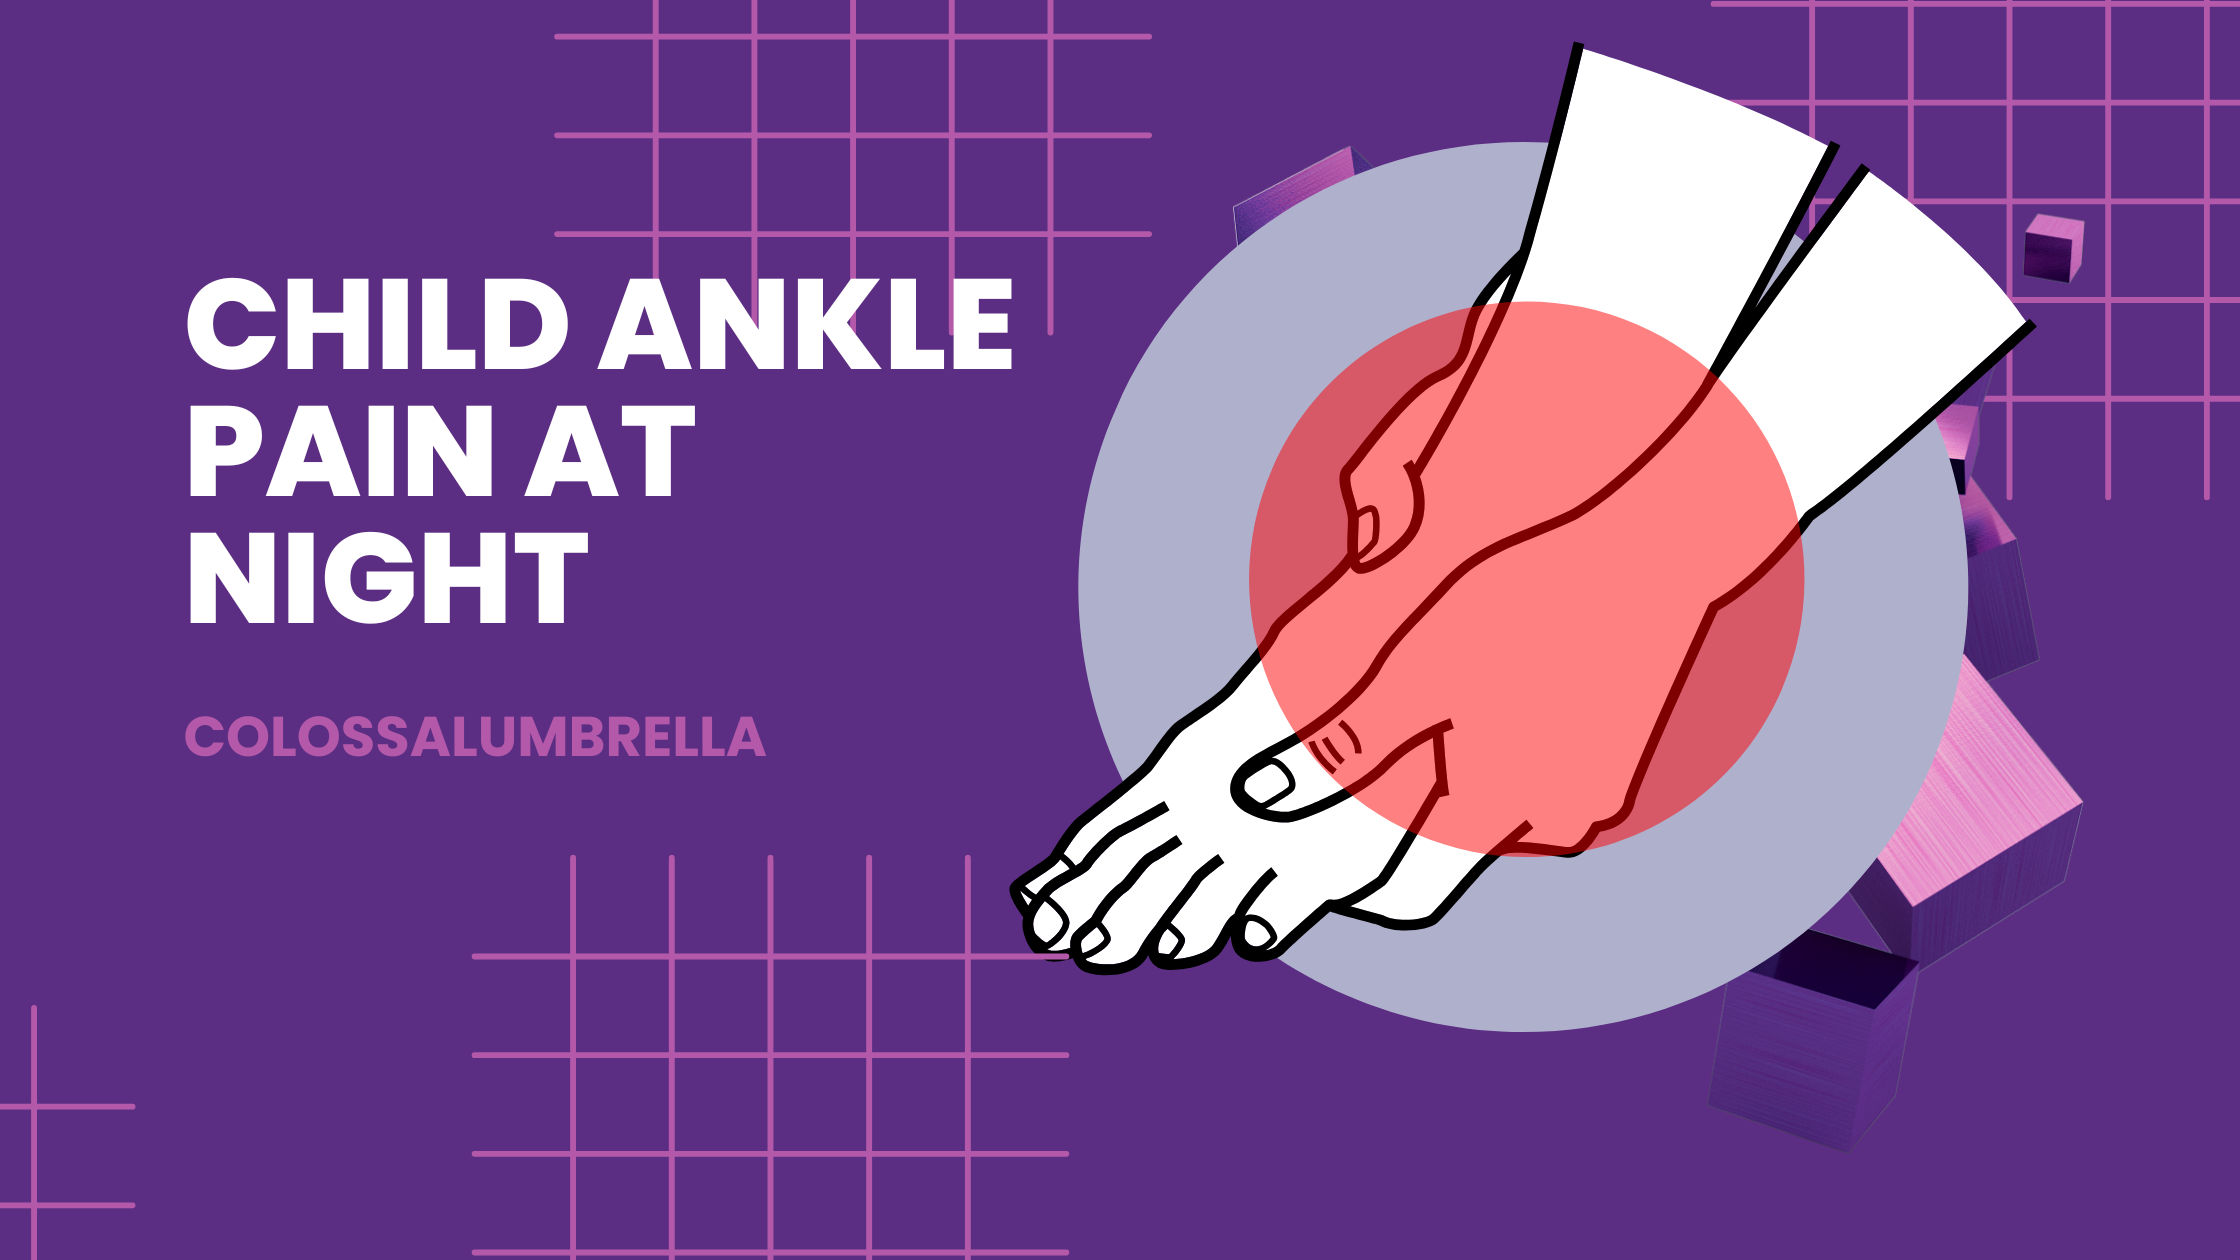 Child ankle pain at night